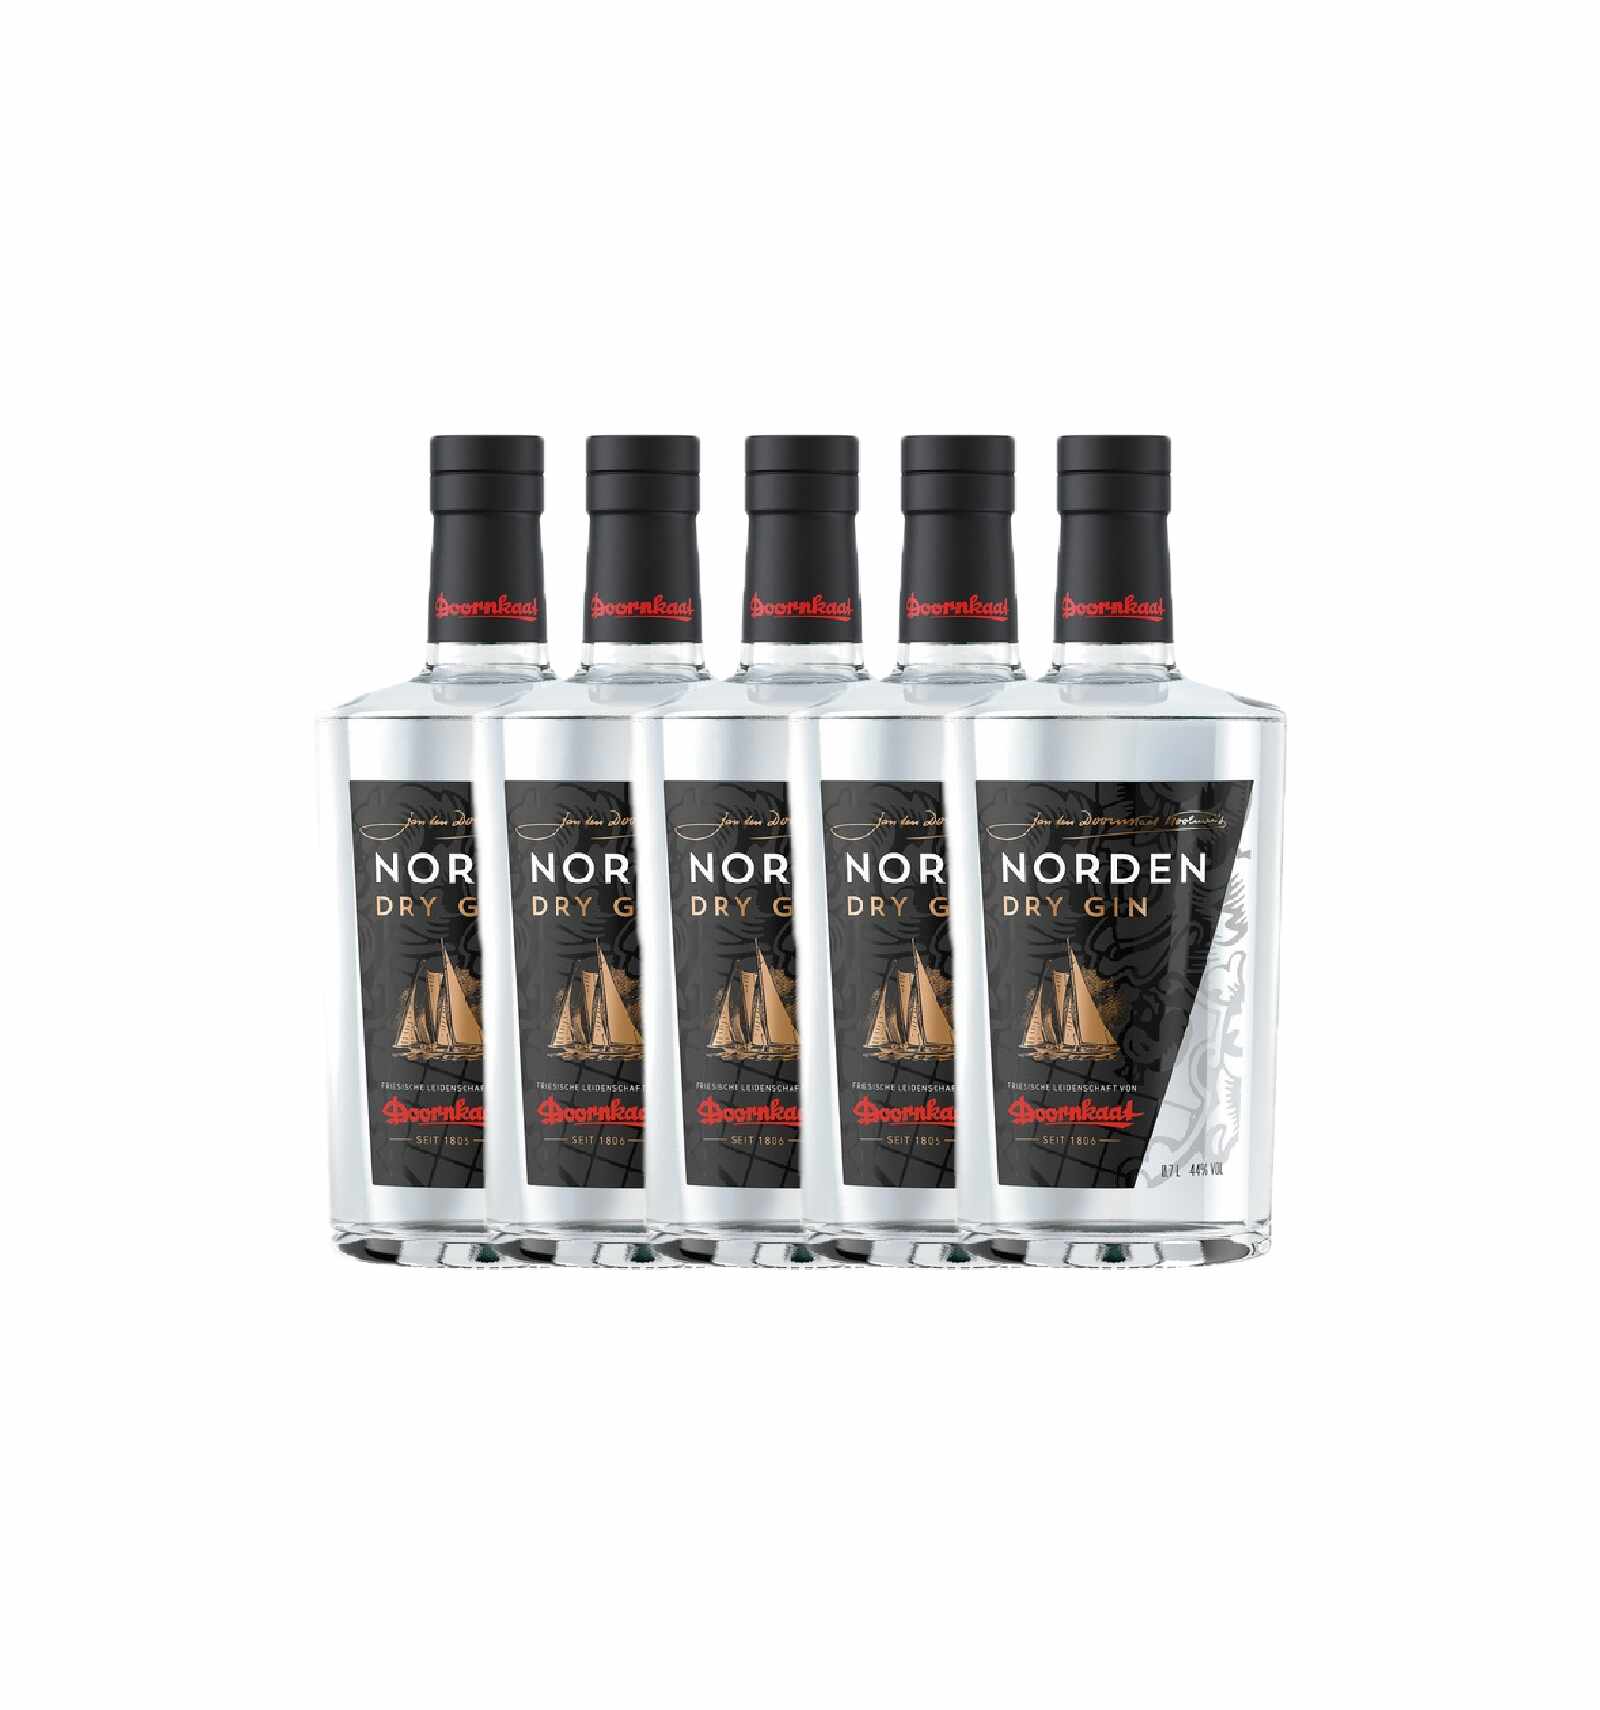 Pachet 5 sticle Gin Norden Dry By Doornkaat 44% alc., 0.7L, Germania